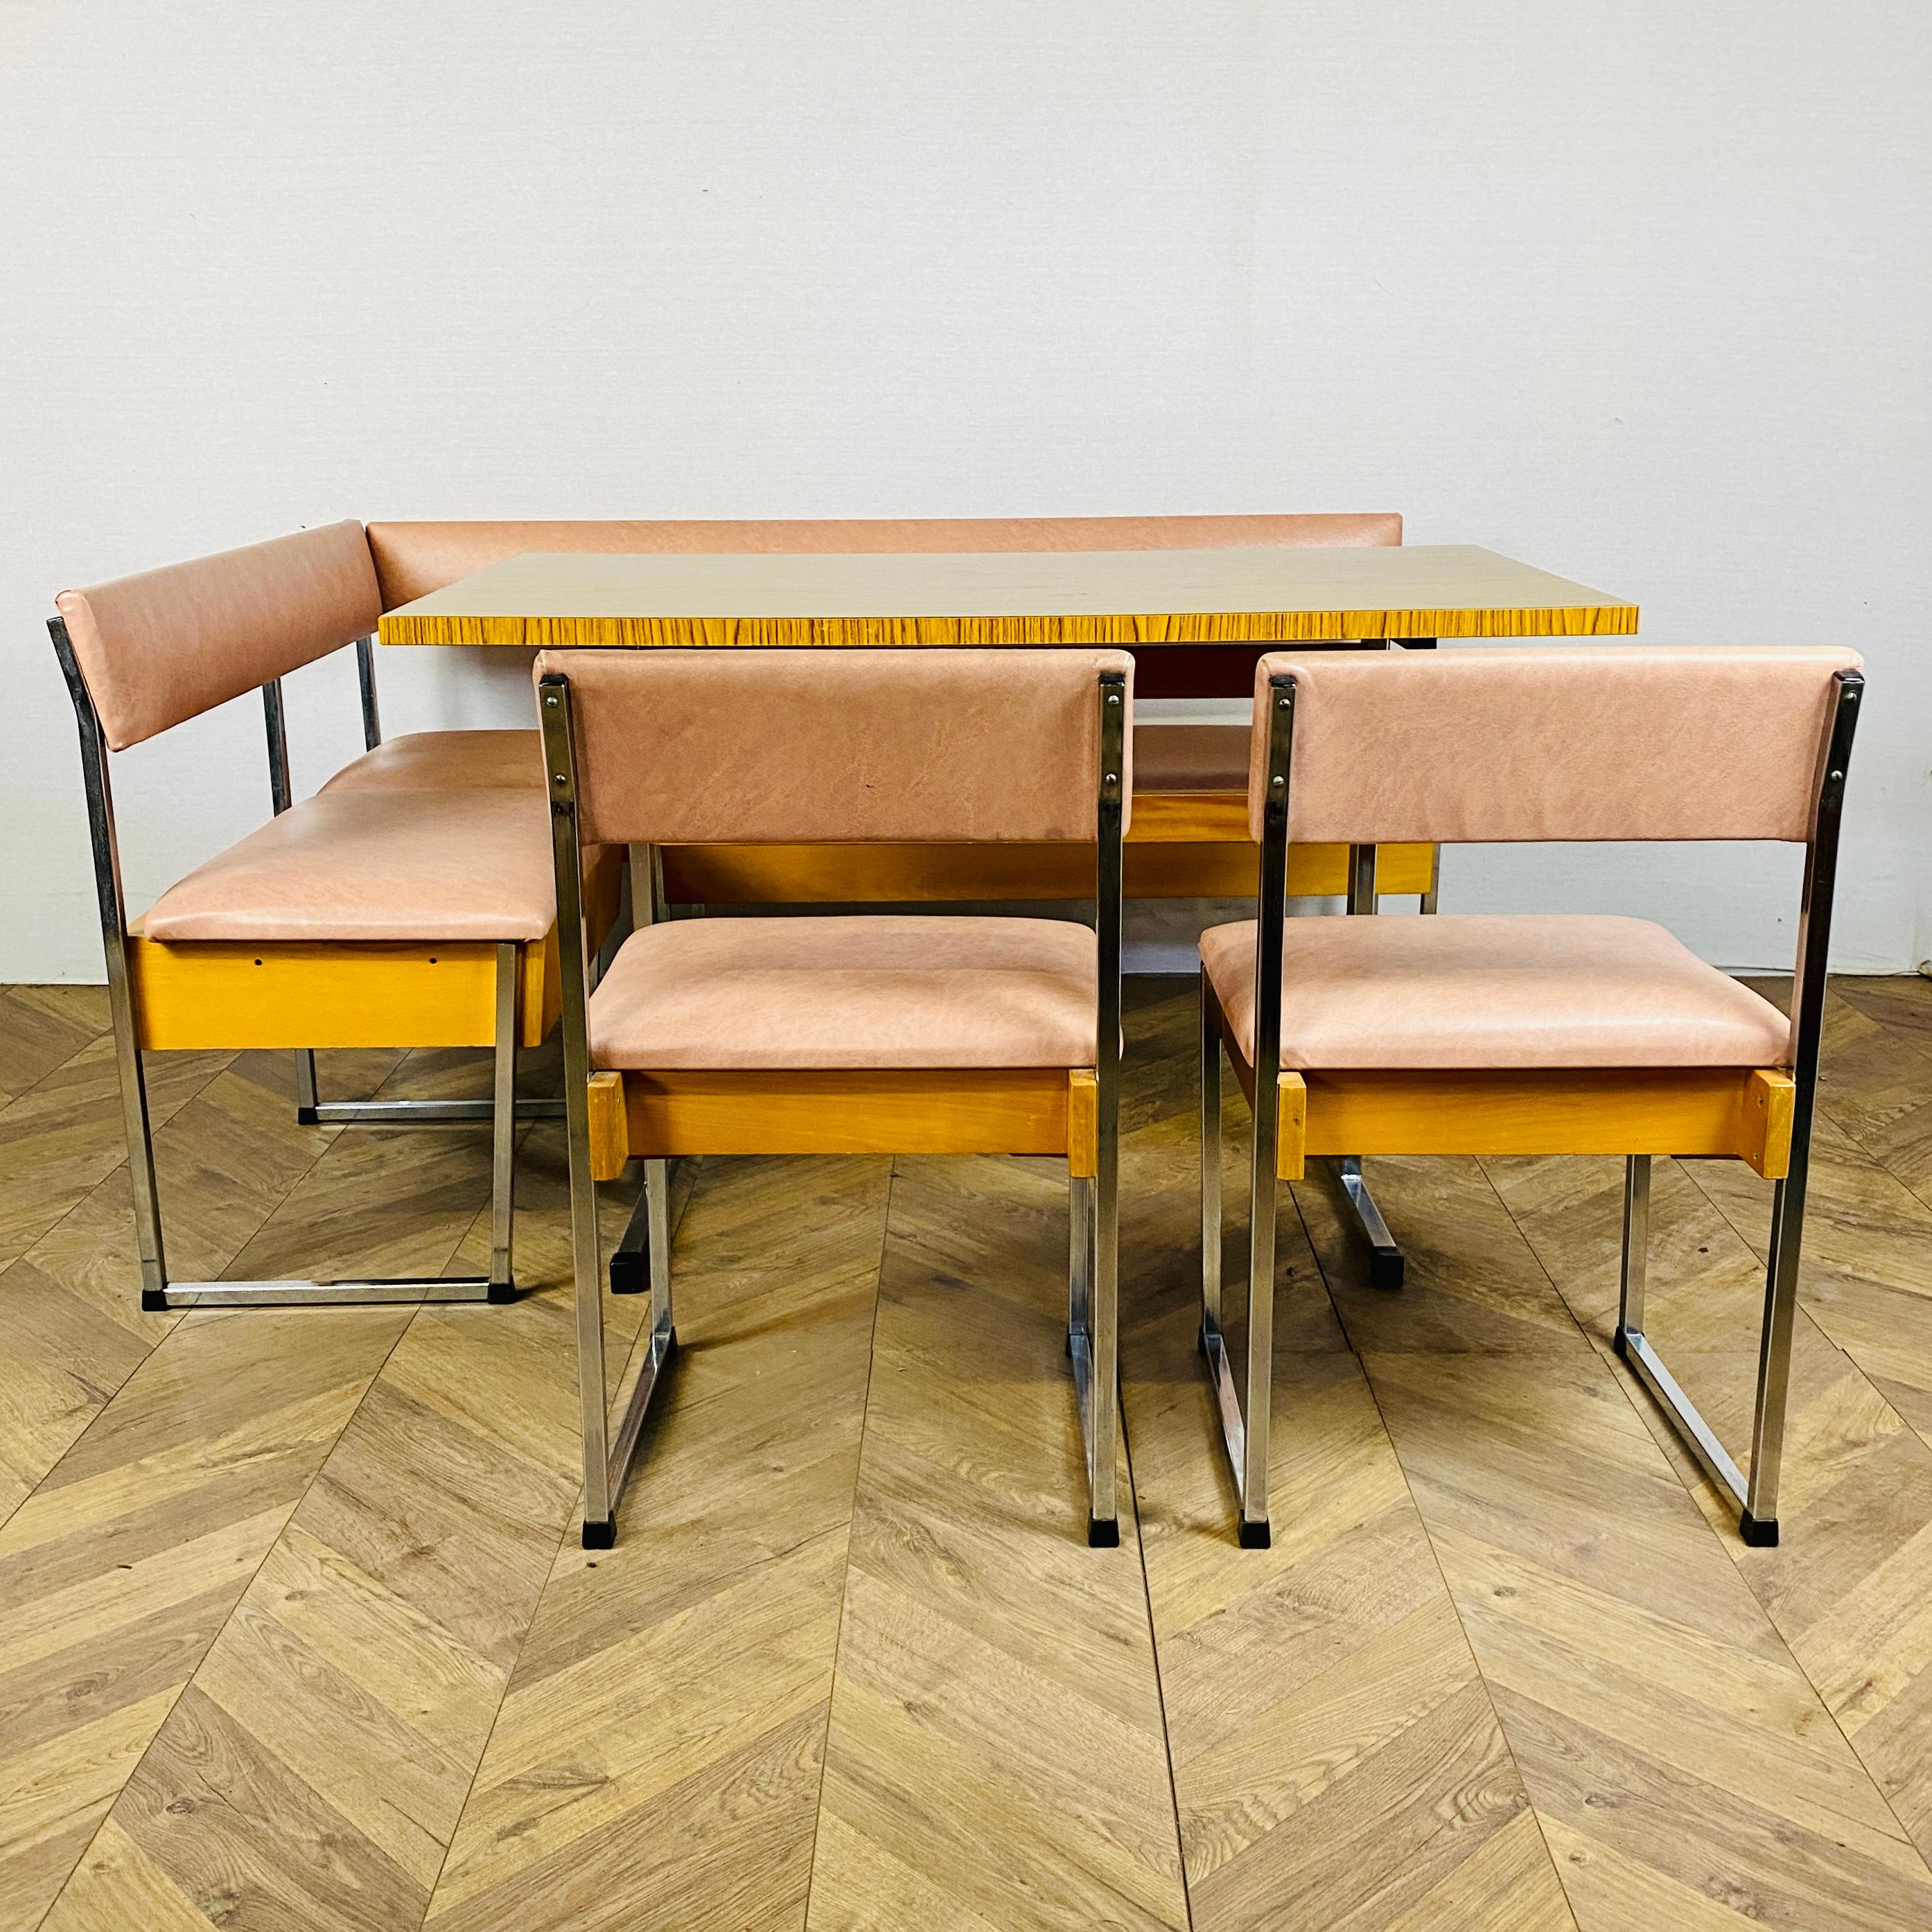 Mid-Century Modern Vintage Corner Dining Set - Table + Banquette Seating + 2 Chairs, 1970s